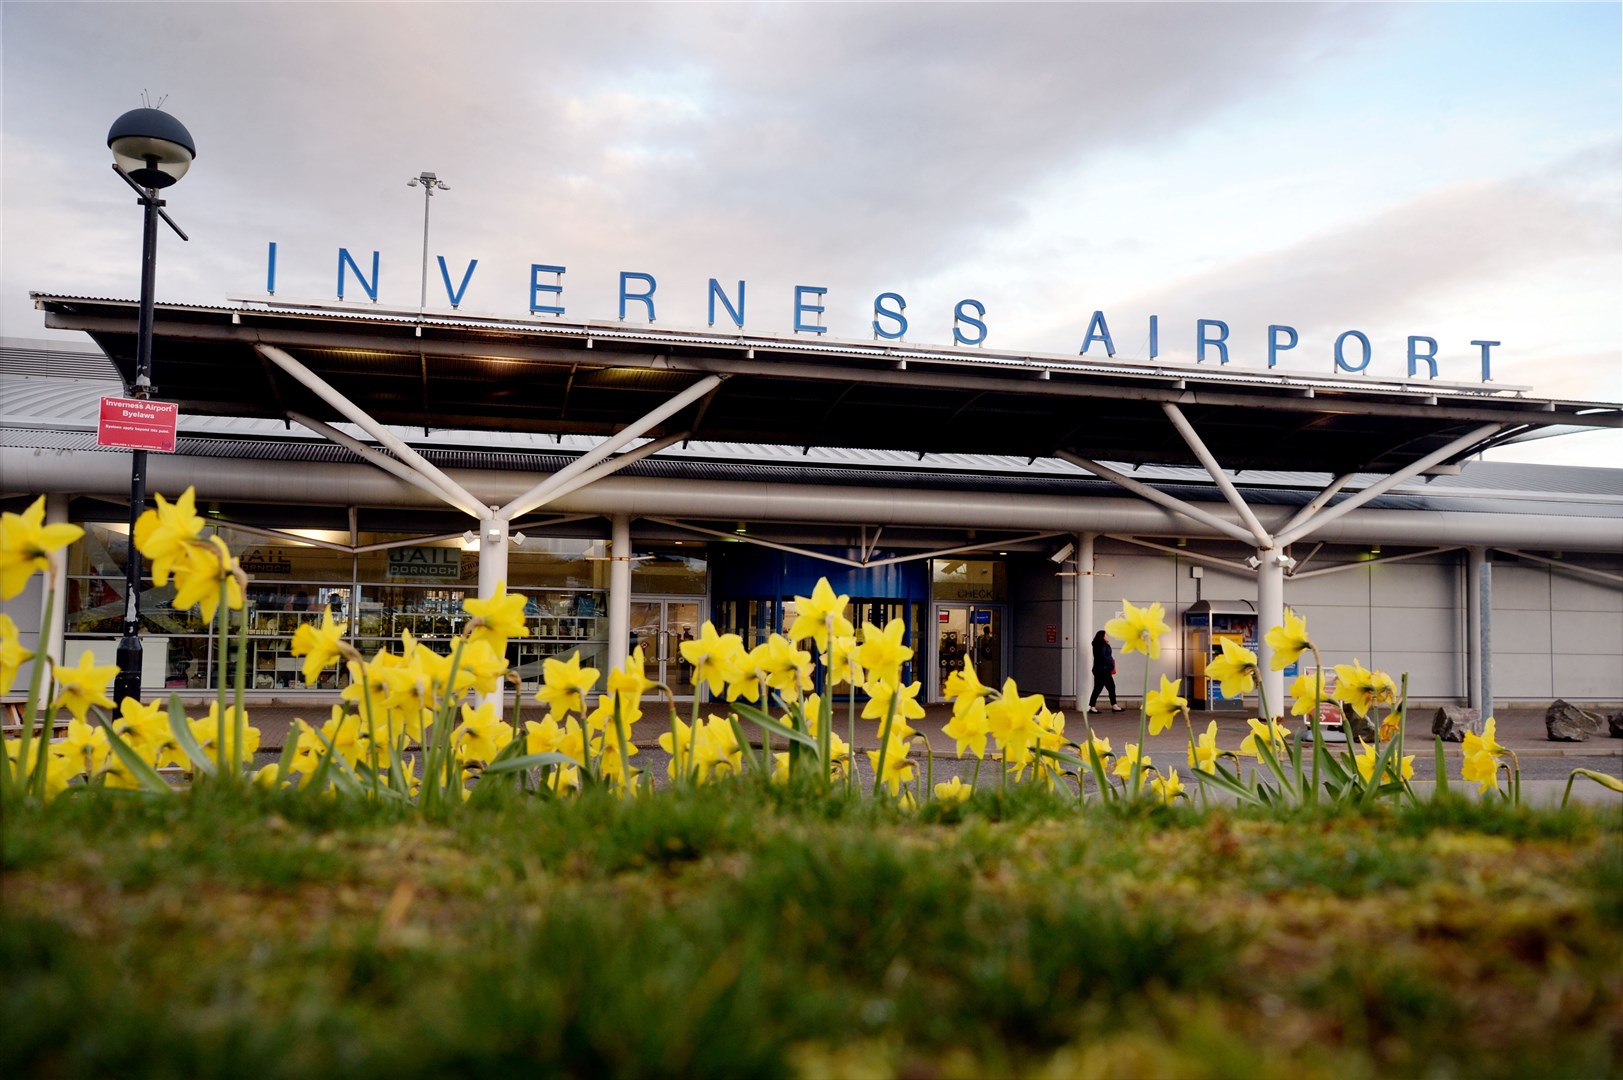 An increased number of flights to Heathrow from the Highland capital should spell a boost to the business and tourism communities, it has been claimed.